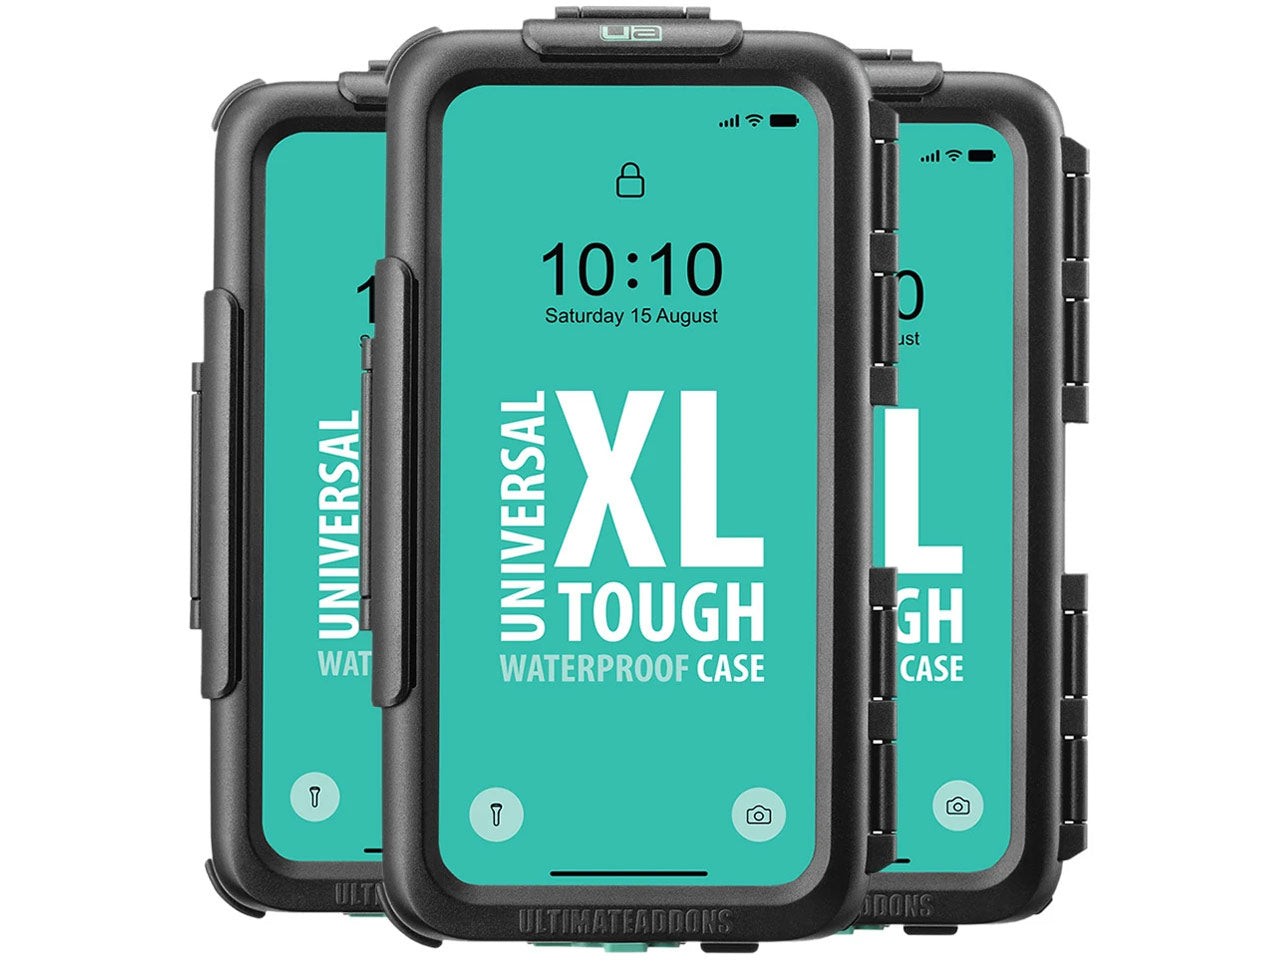 Ultimateaddons Tough Waterproof Phone Cases and Sony Durable Adapters